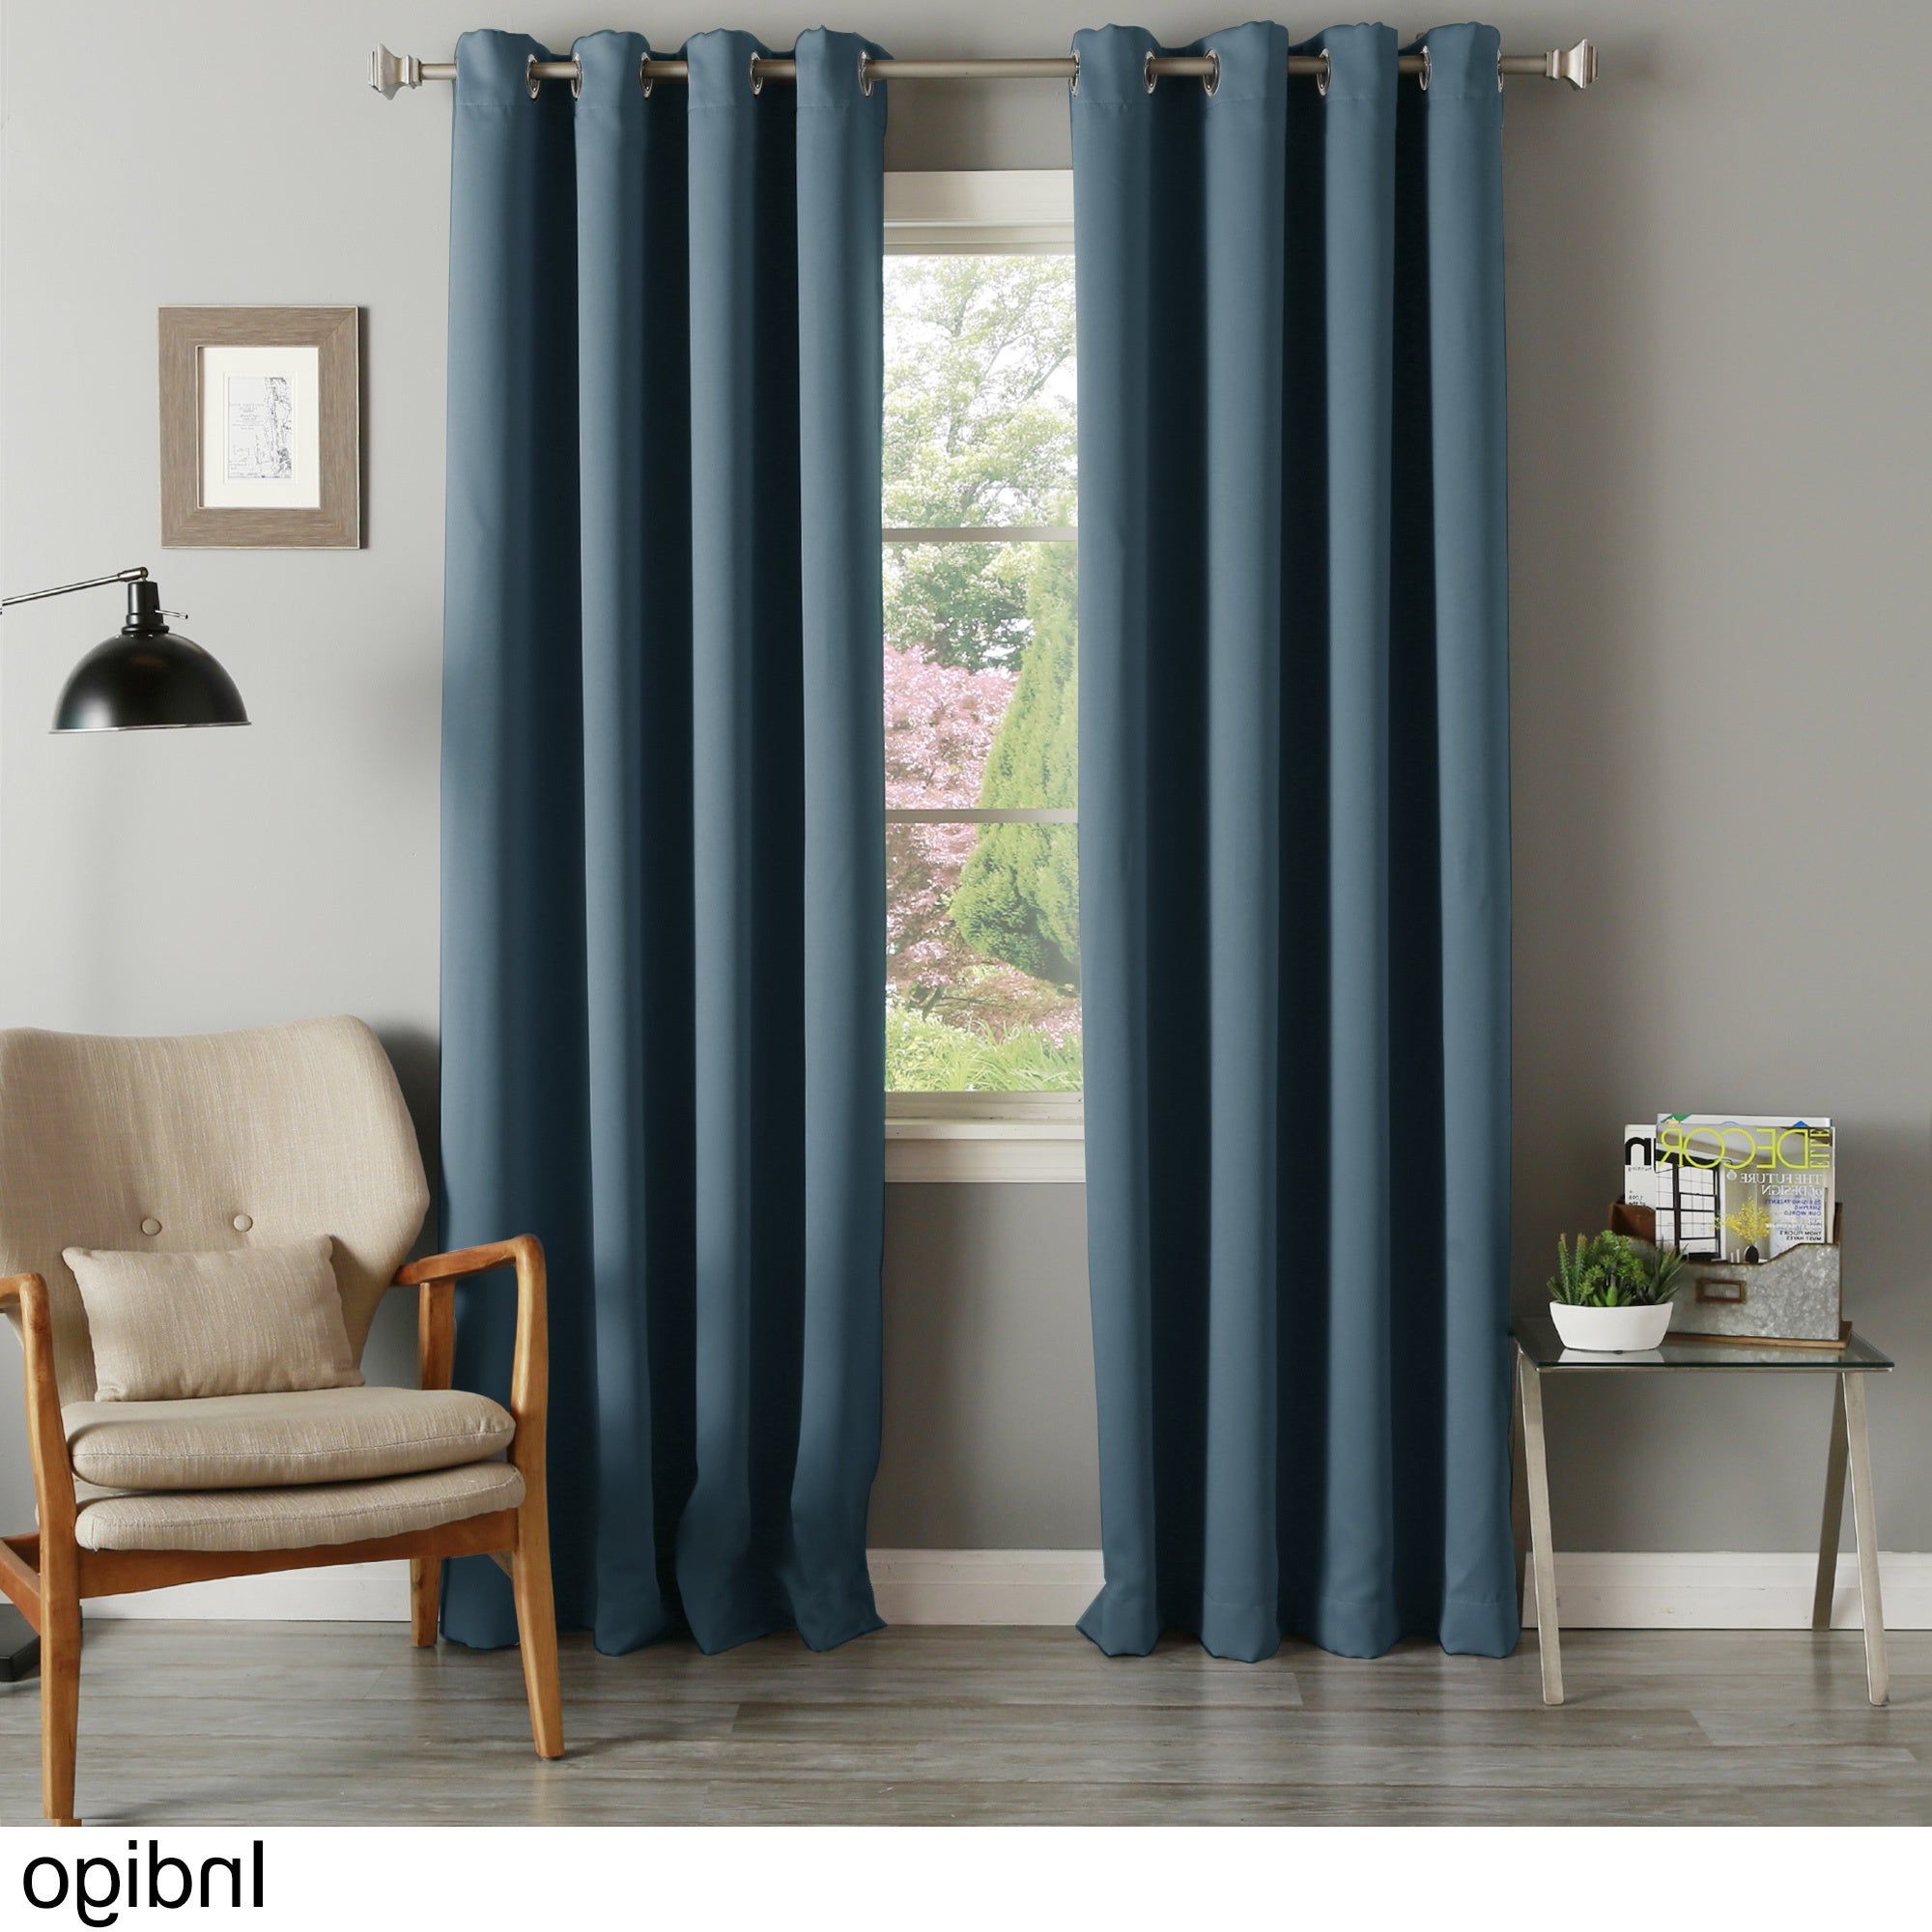 Best And Newest Aurora Home Silvertone Grommet Thermal Insulated Blackout Curtain Panel Pair Intended For Thermal Insulated Blackout Curtain Pairs (View 5 of 20)